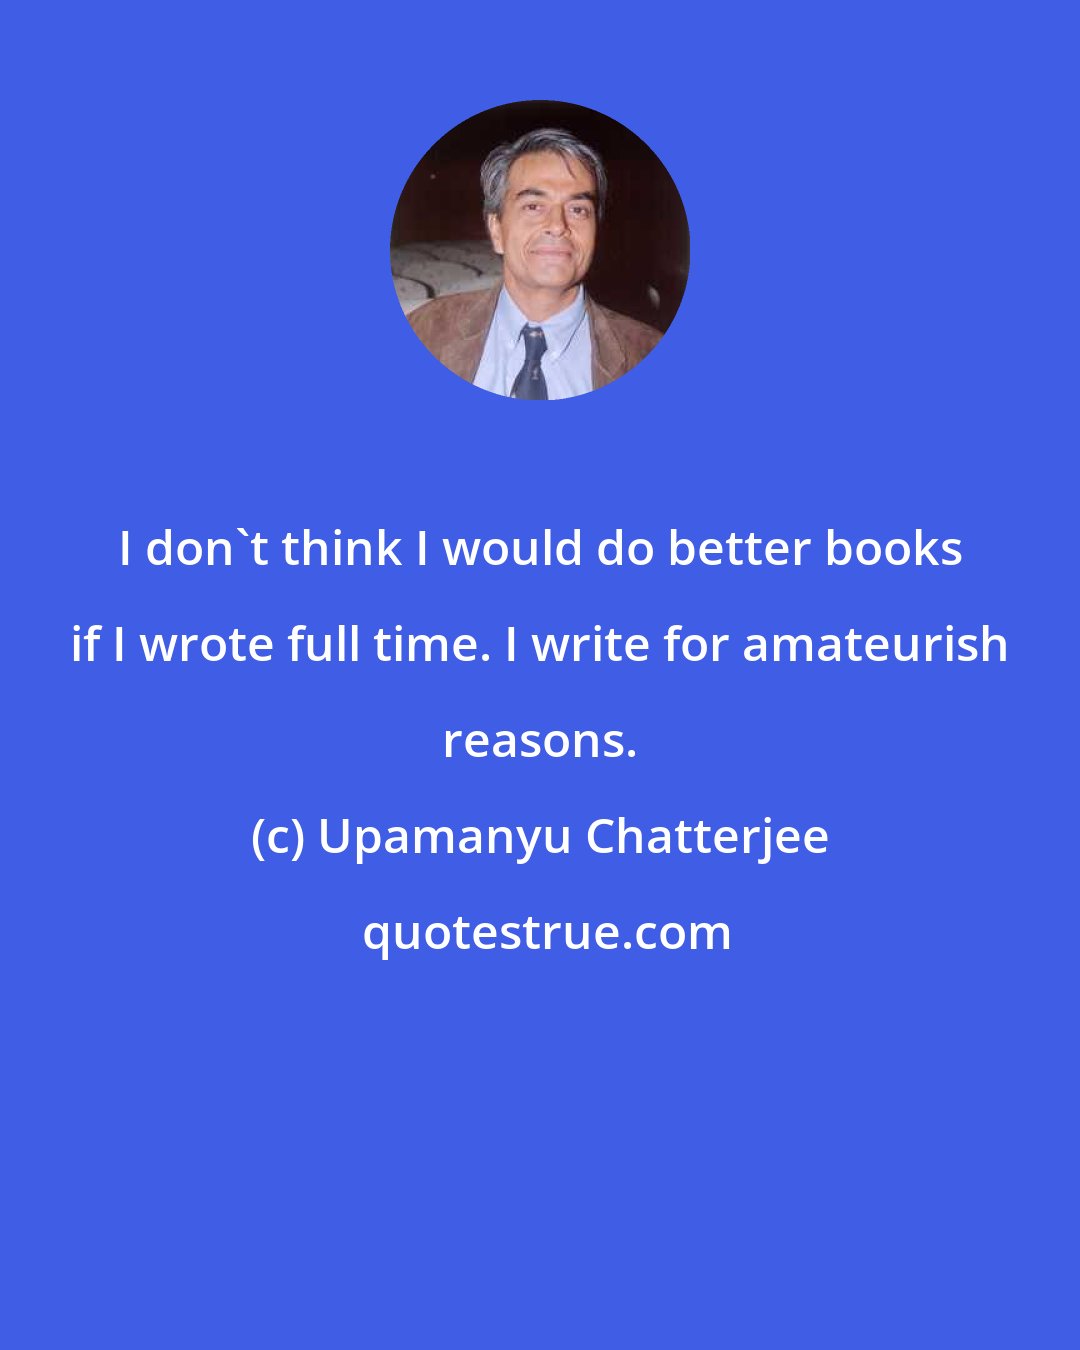 Upamanyu Chatterjee: I don't think I would do better books if I wrote full time. I write for amateurish reasons.